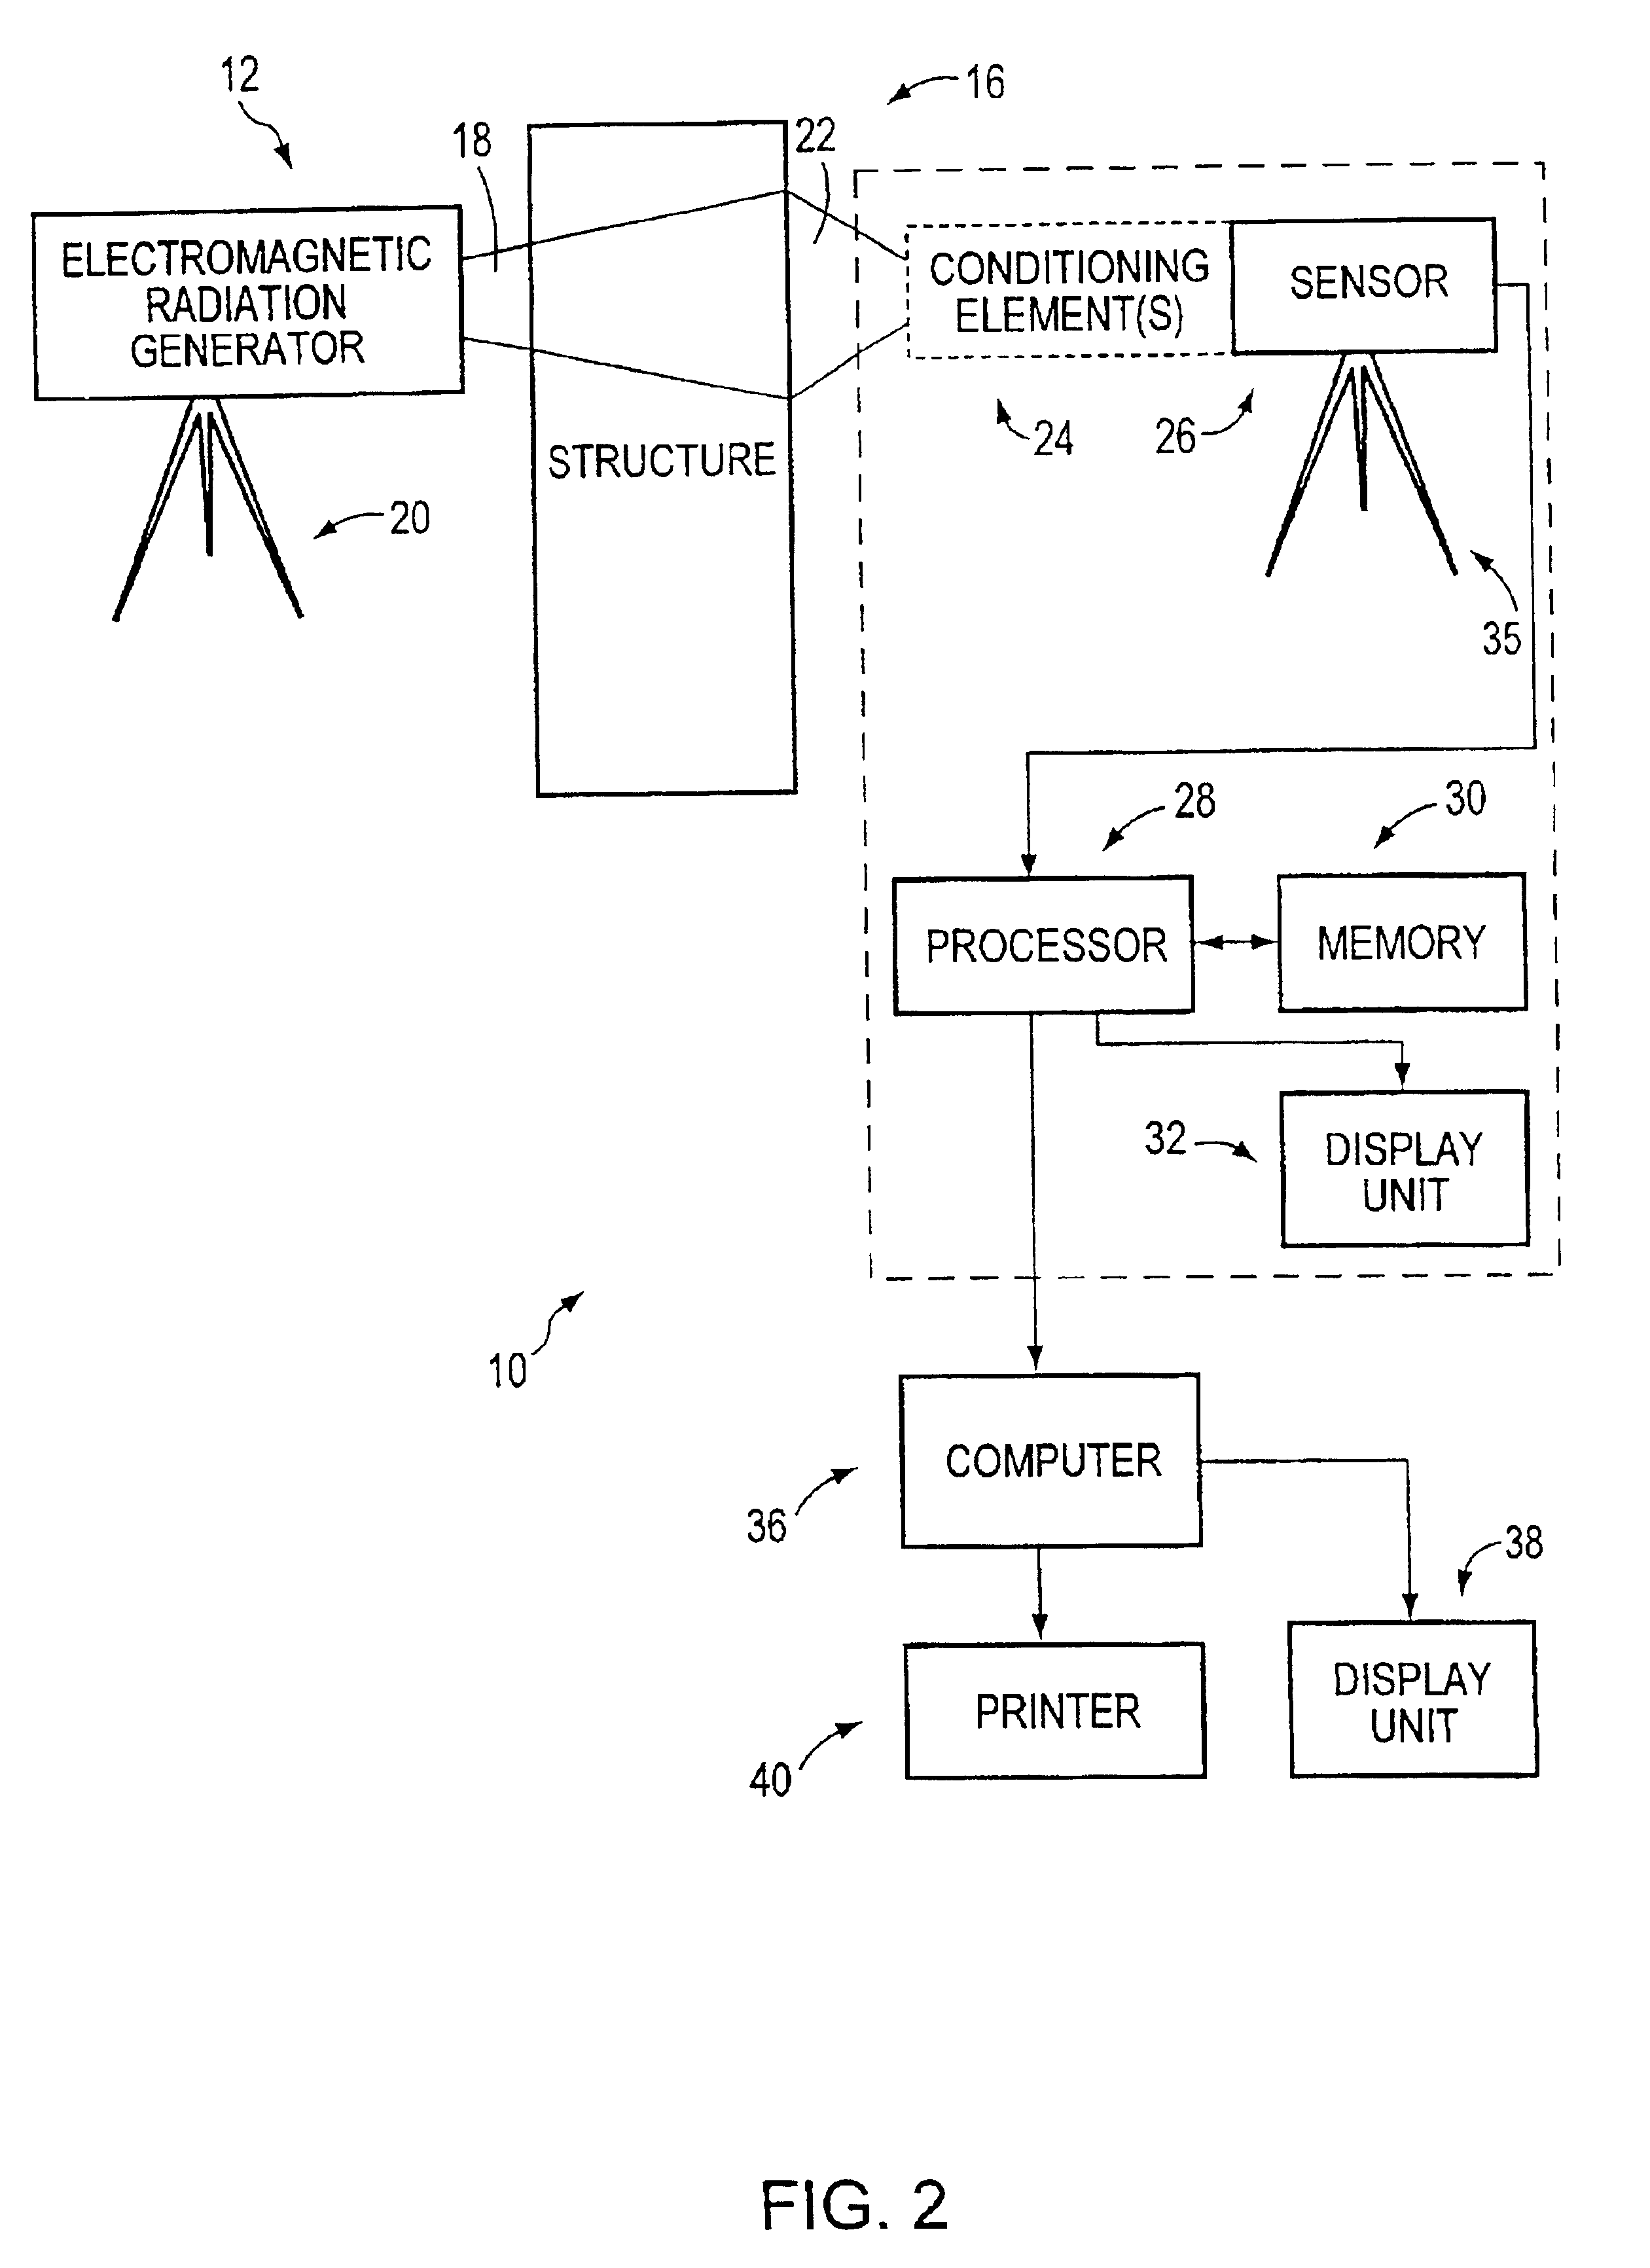 Water detection and source identification methods for structures using electromagnetic radiation spectroscopy